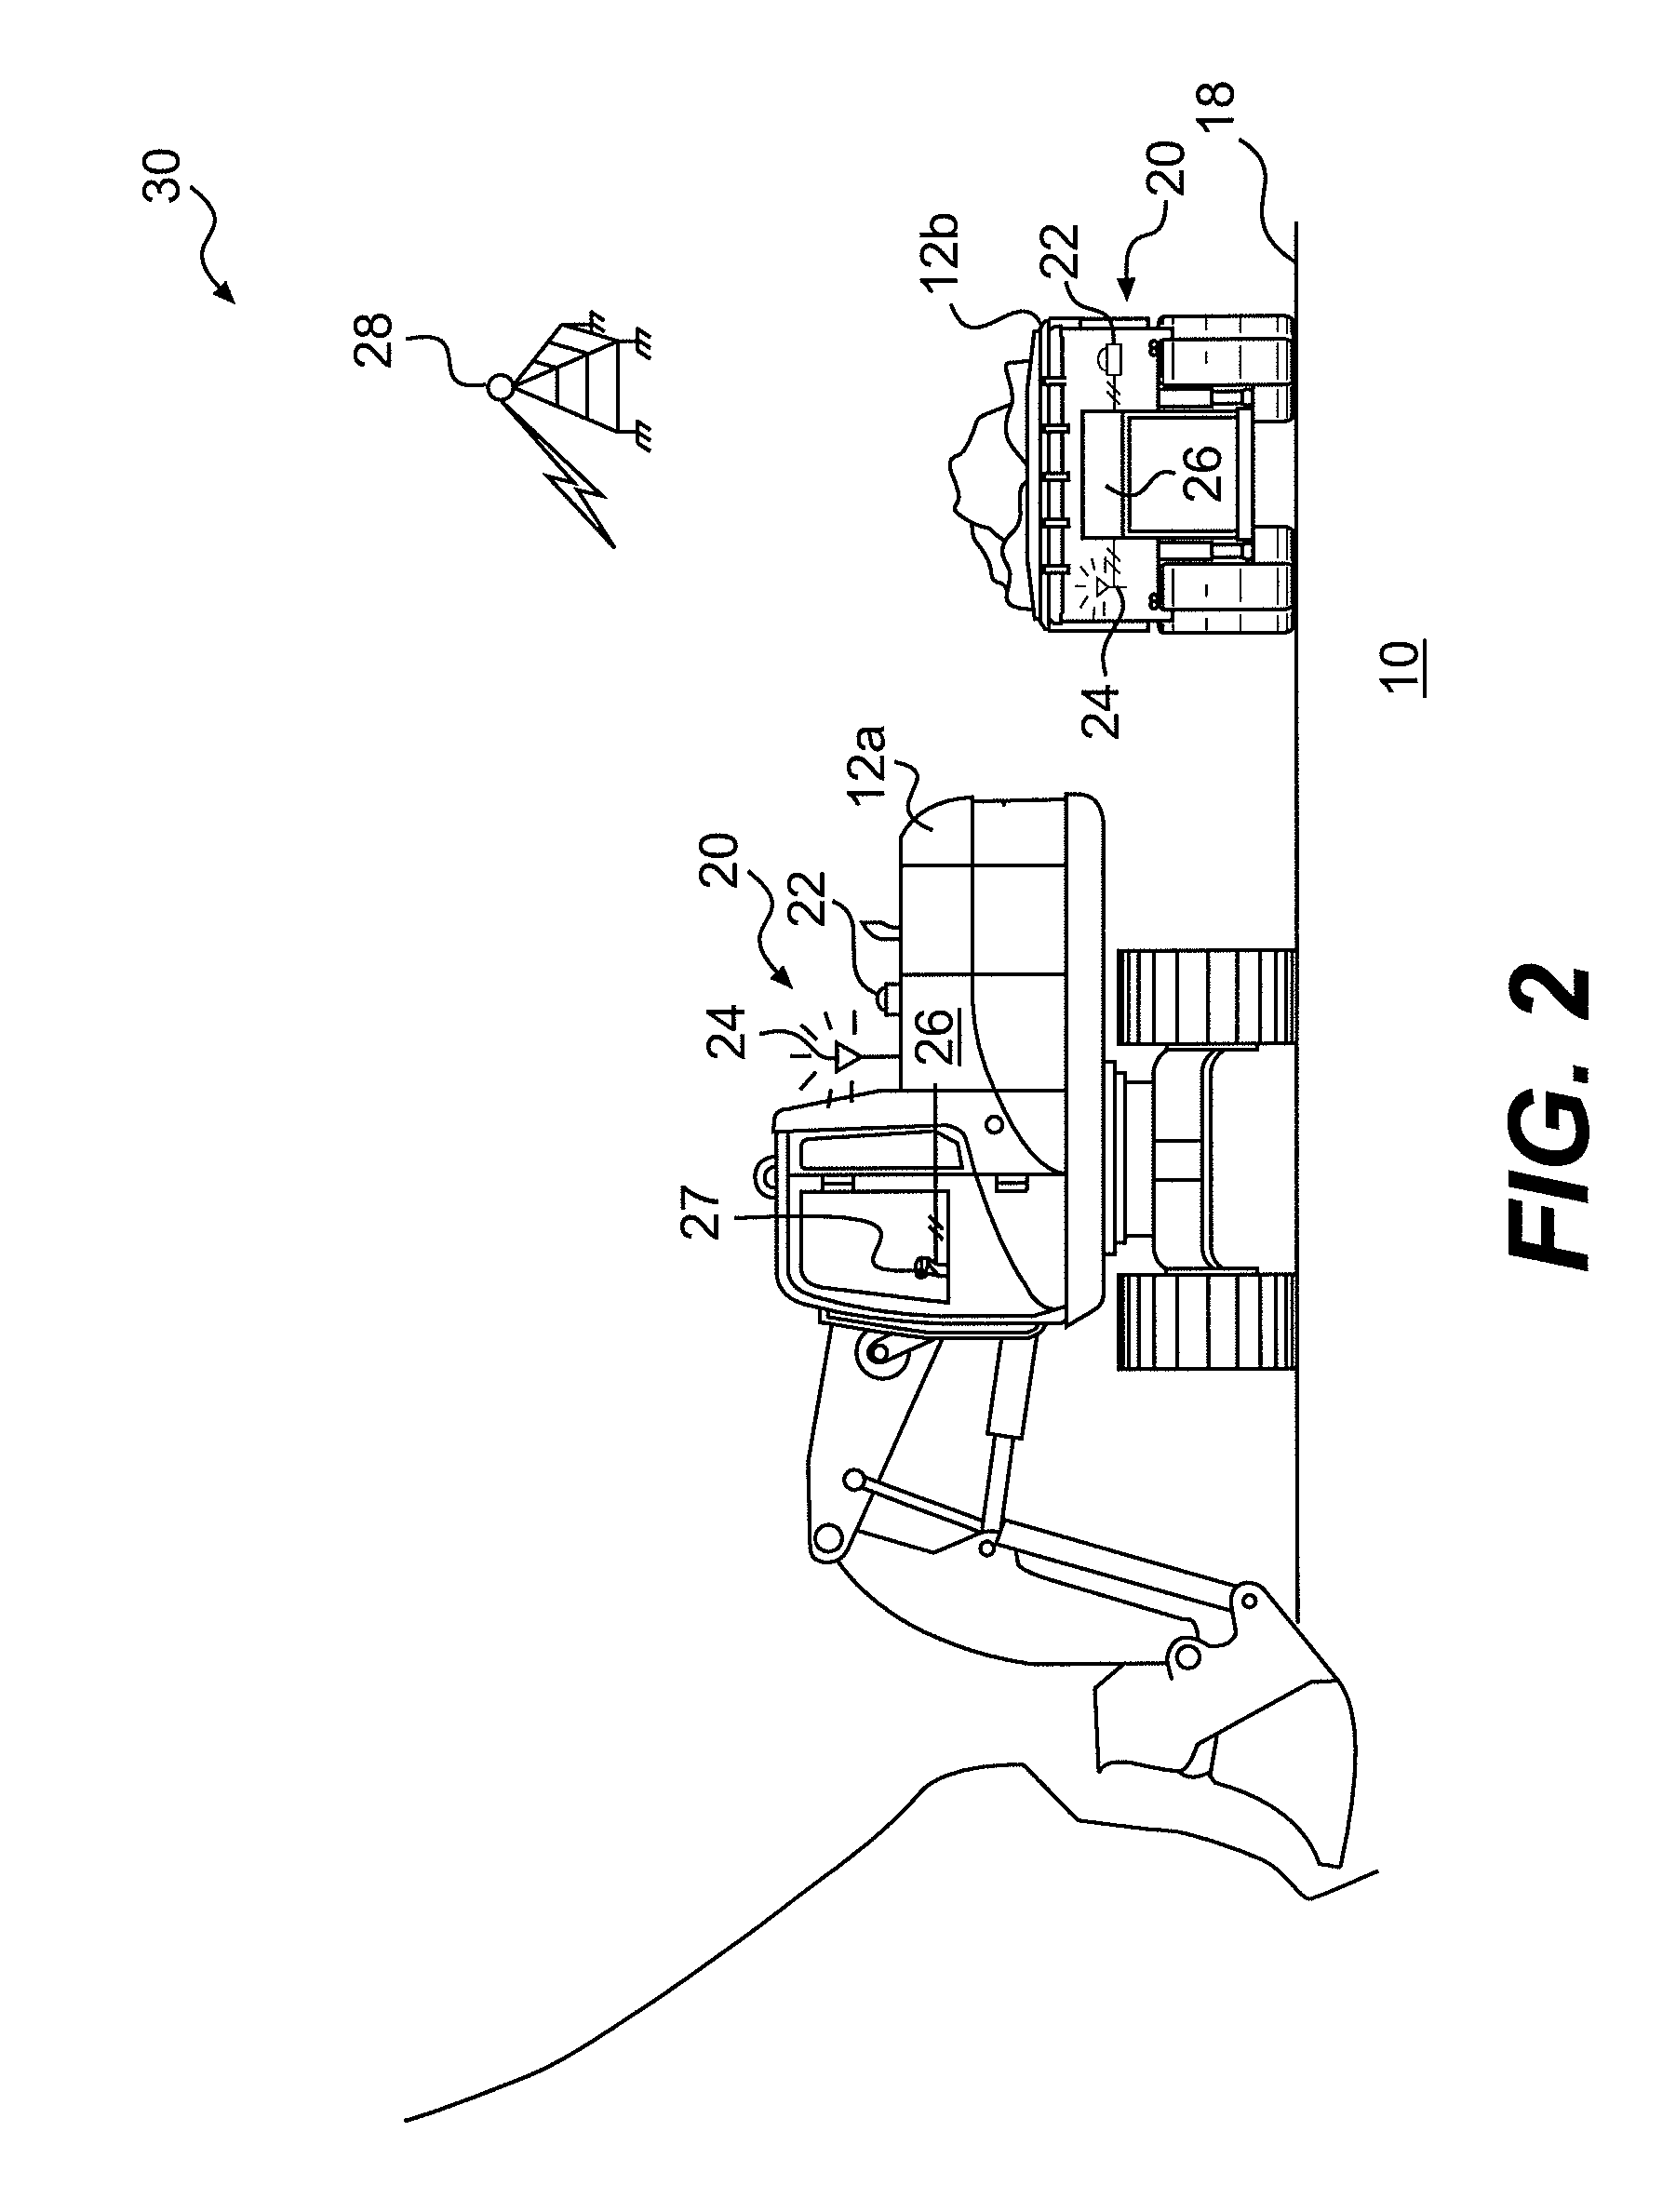 System for autonomous path planning and machine control